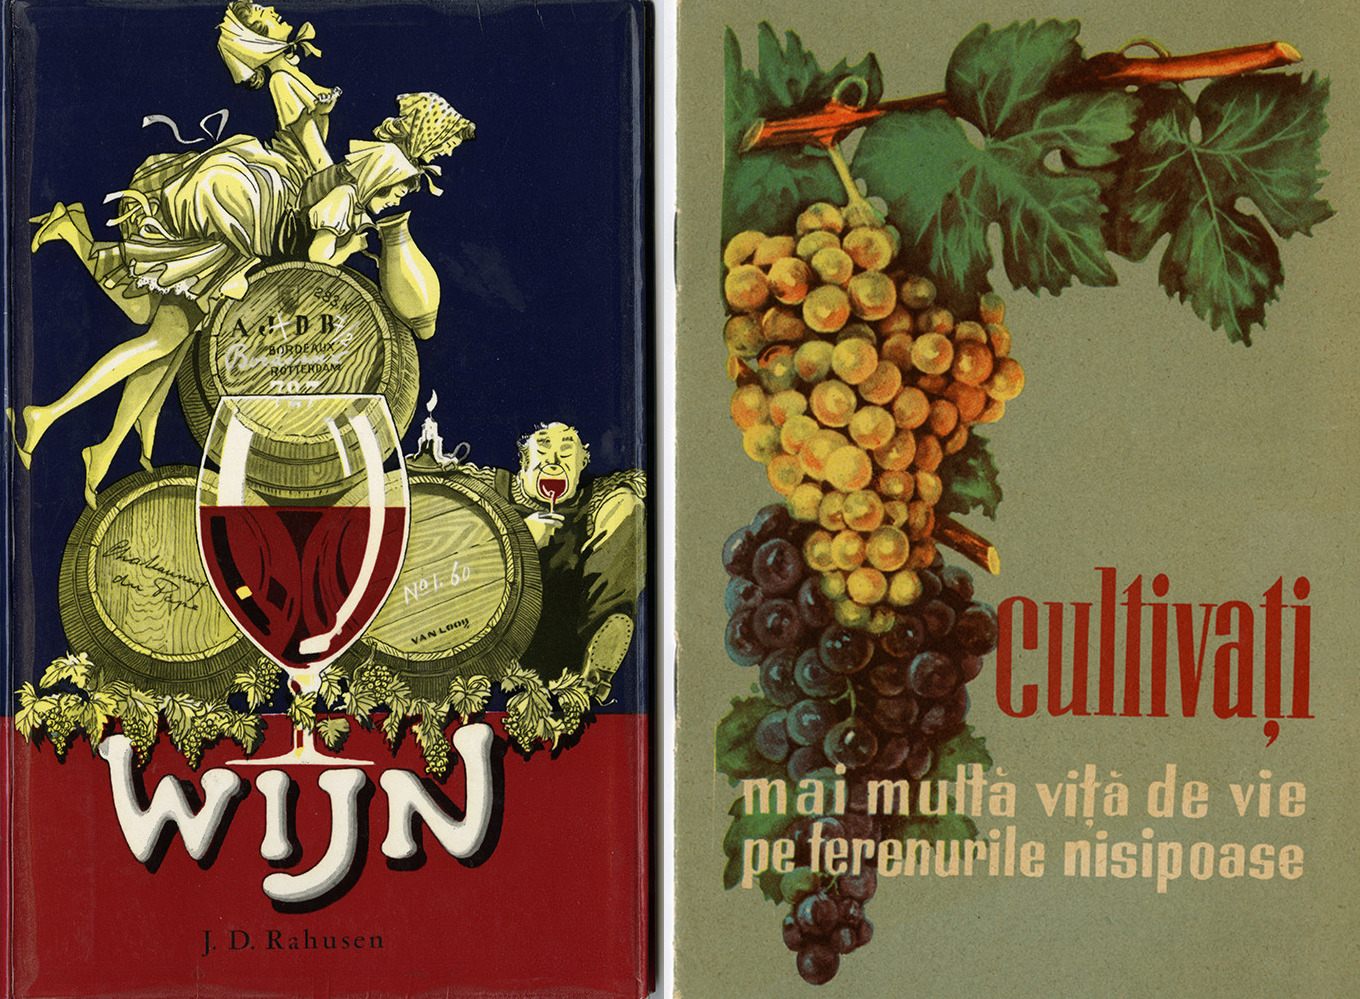 Two wine pamphlets from the collection.